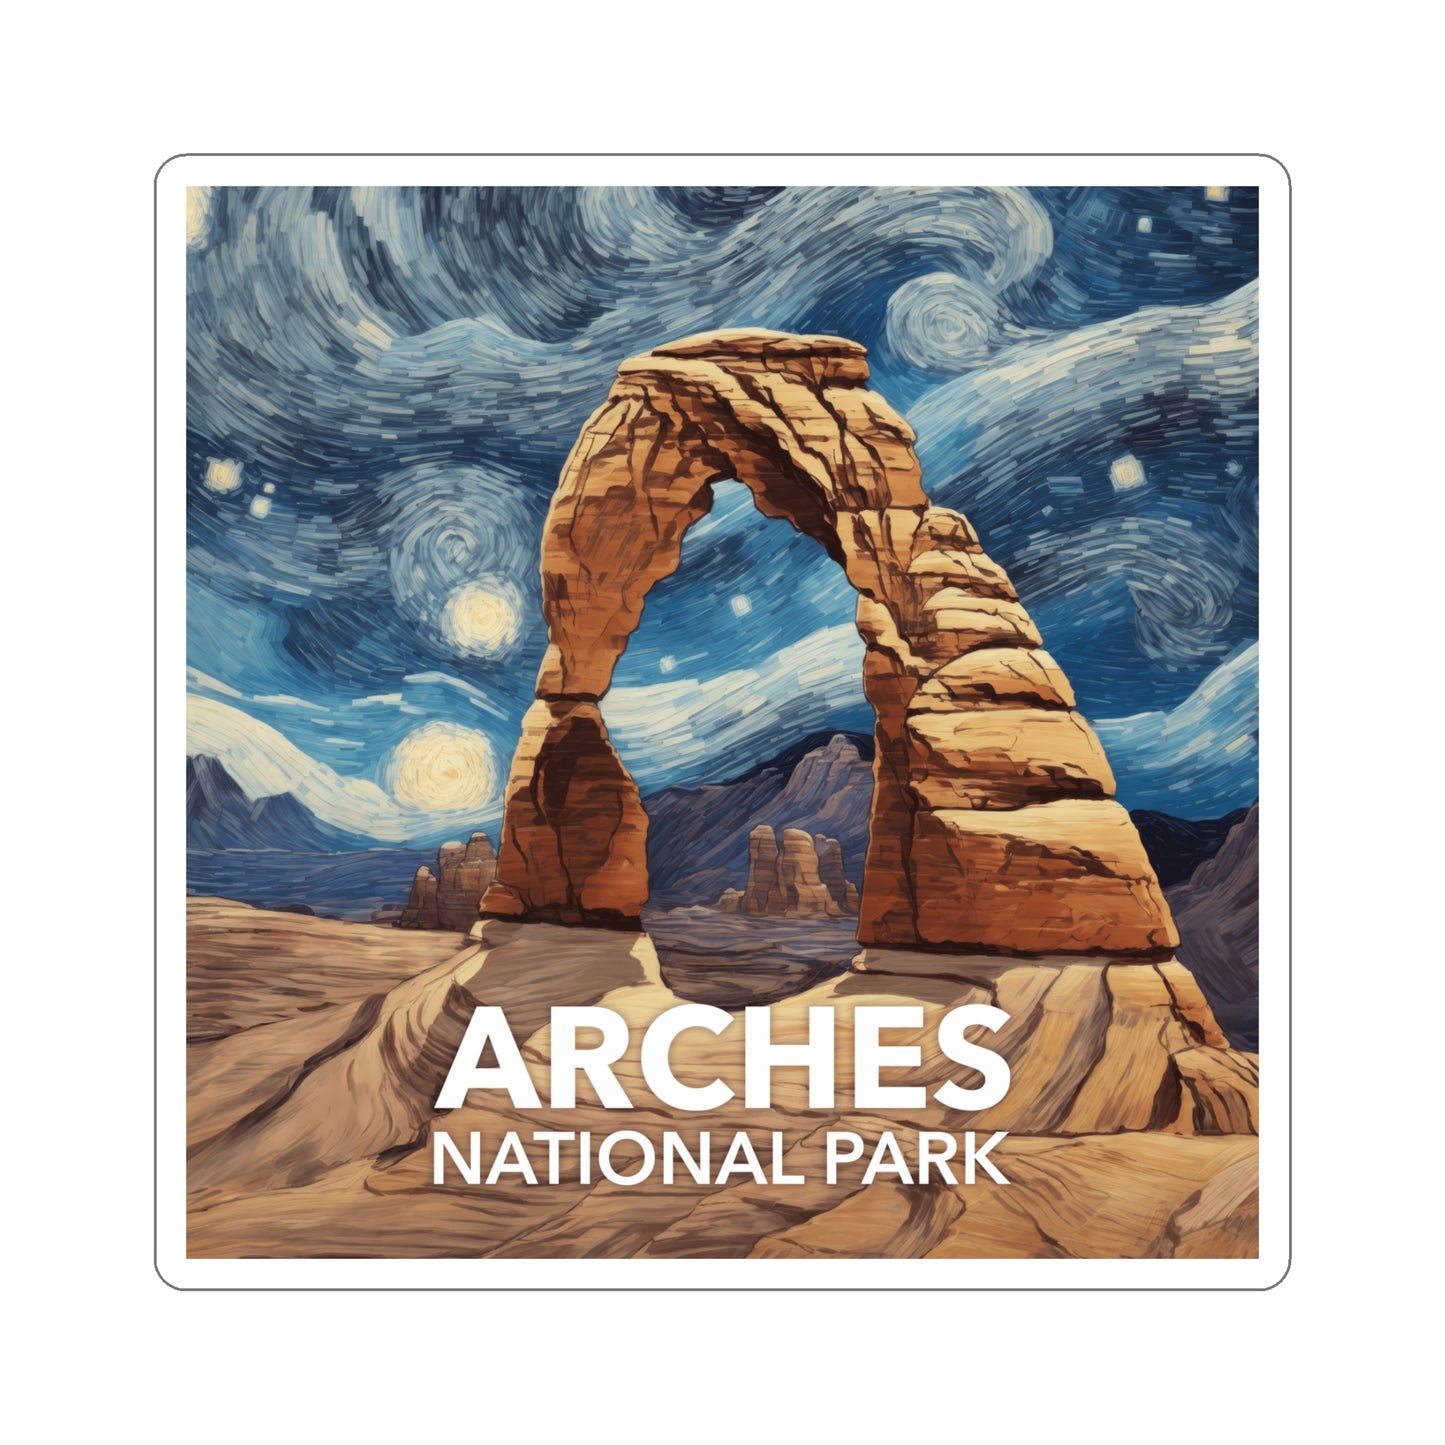 Arches National Park Sticker - The Starry Night